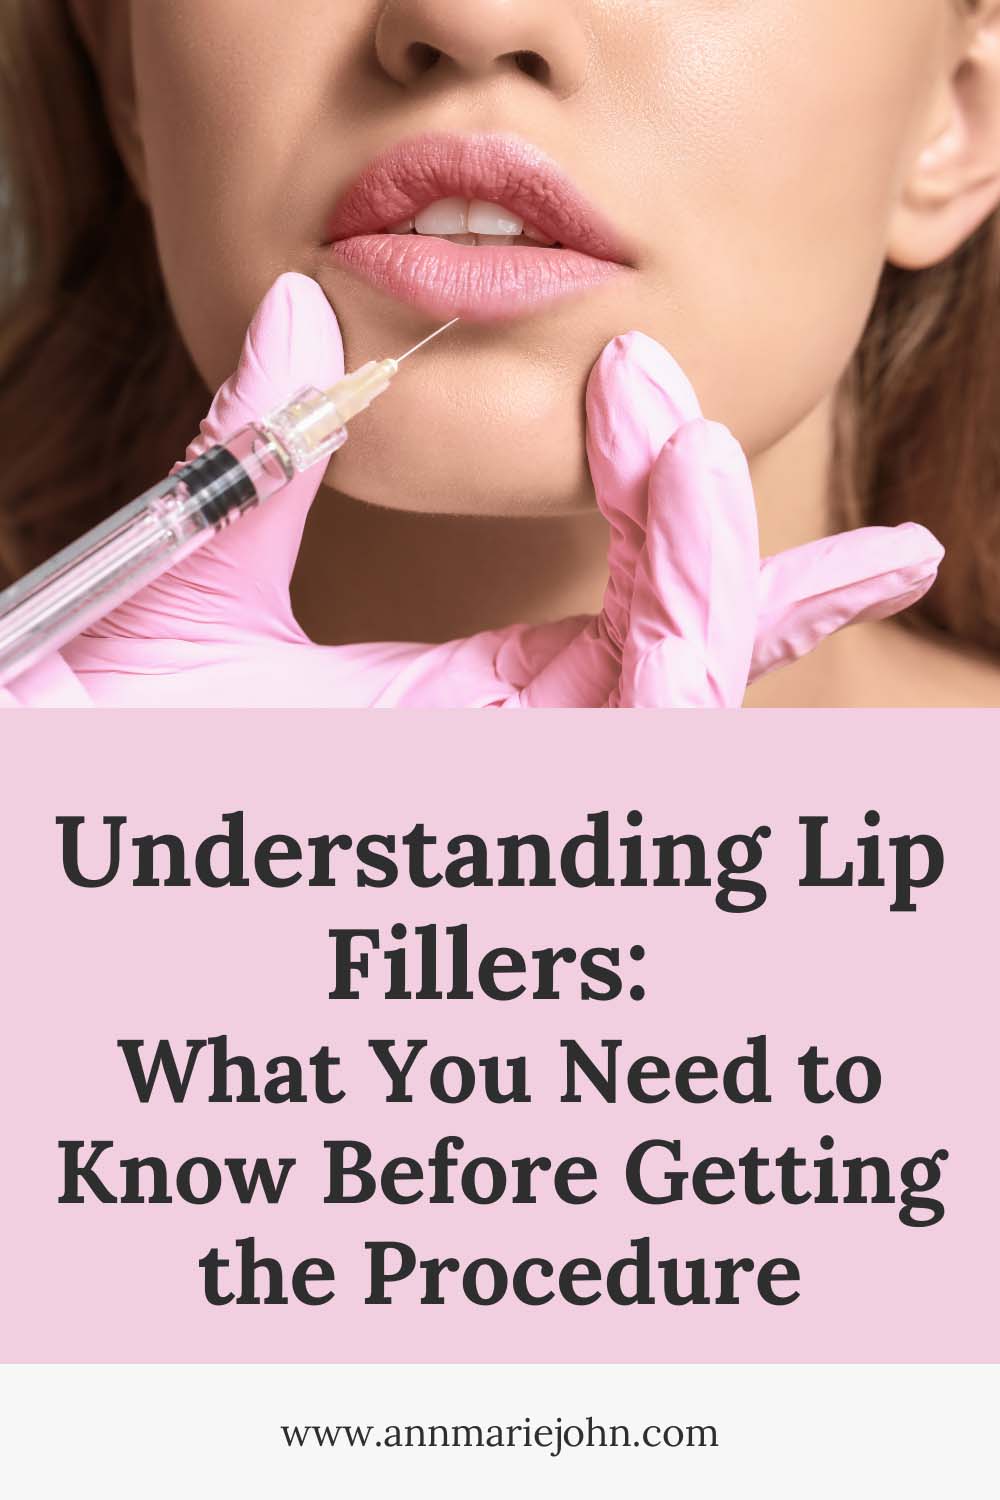 Understanding Lip Fillers: What You Need to Know Before Getting the Procedure